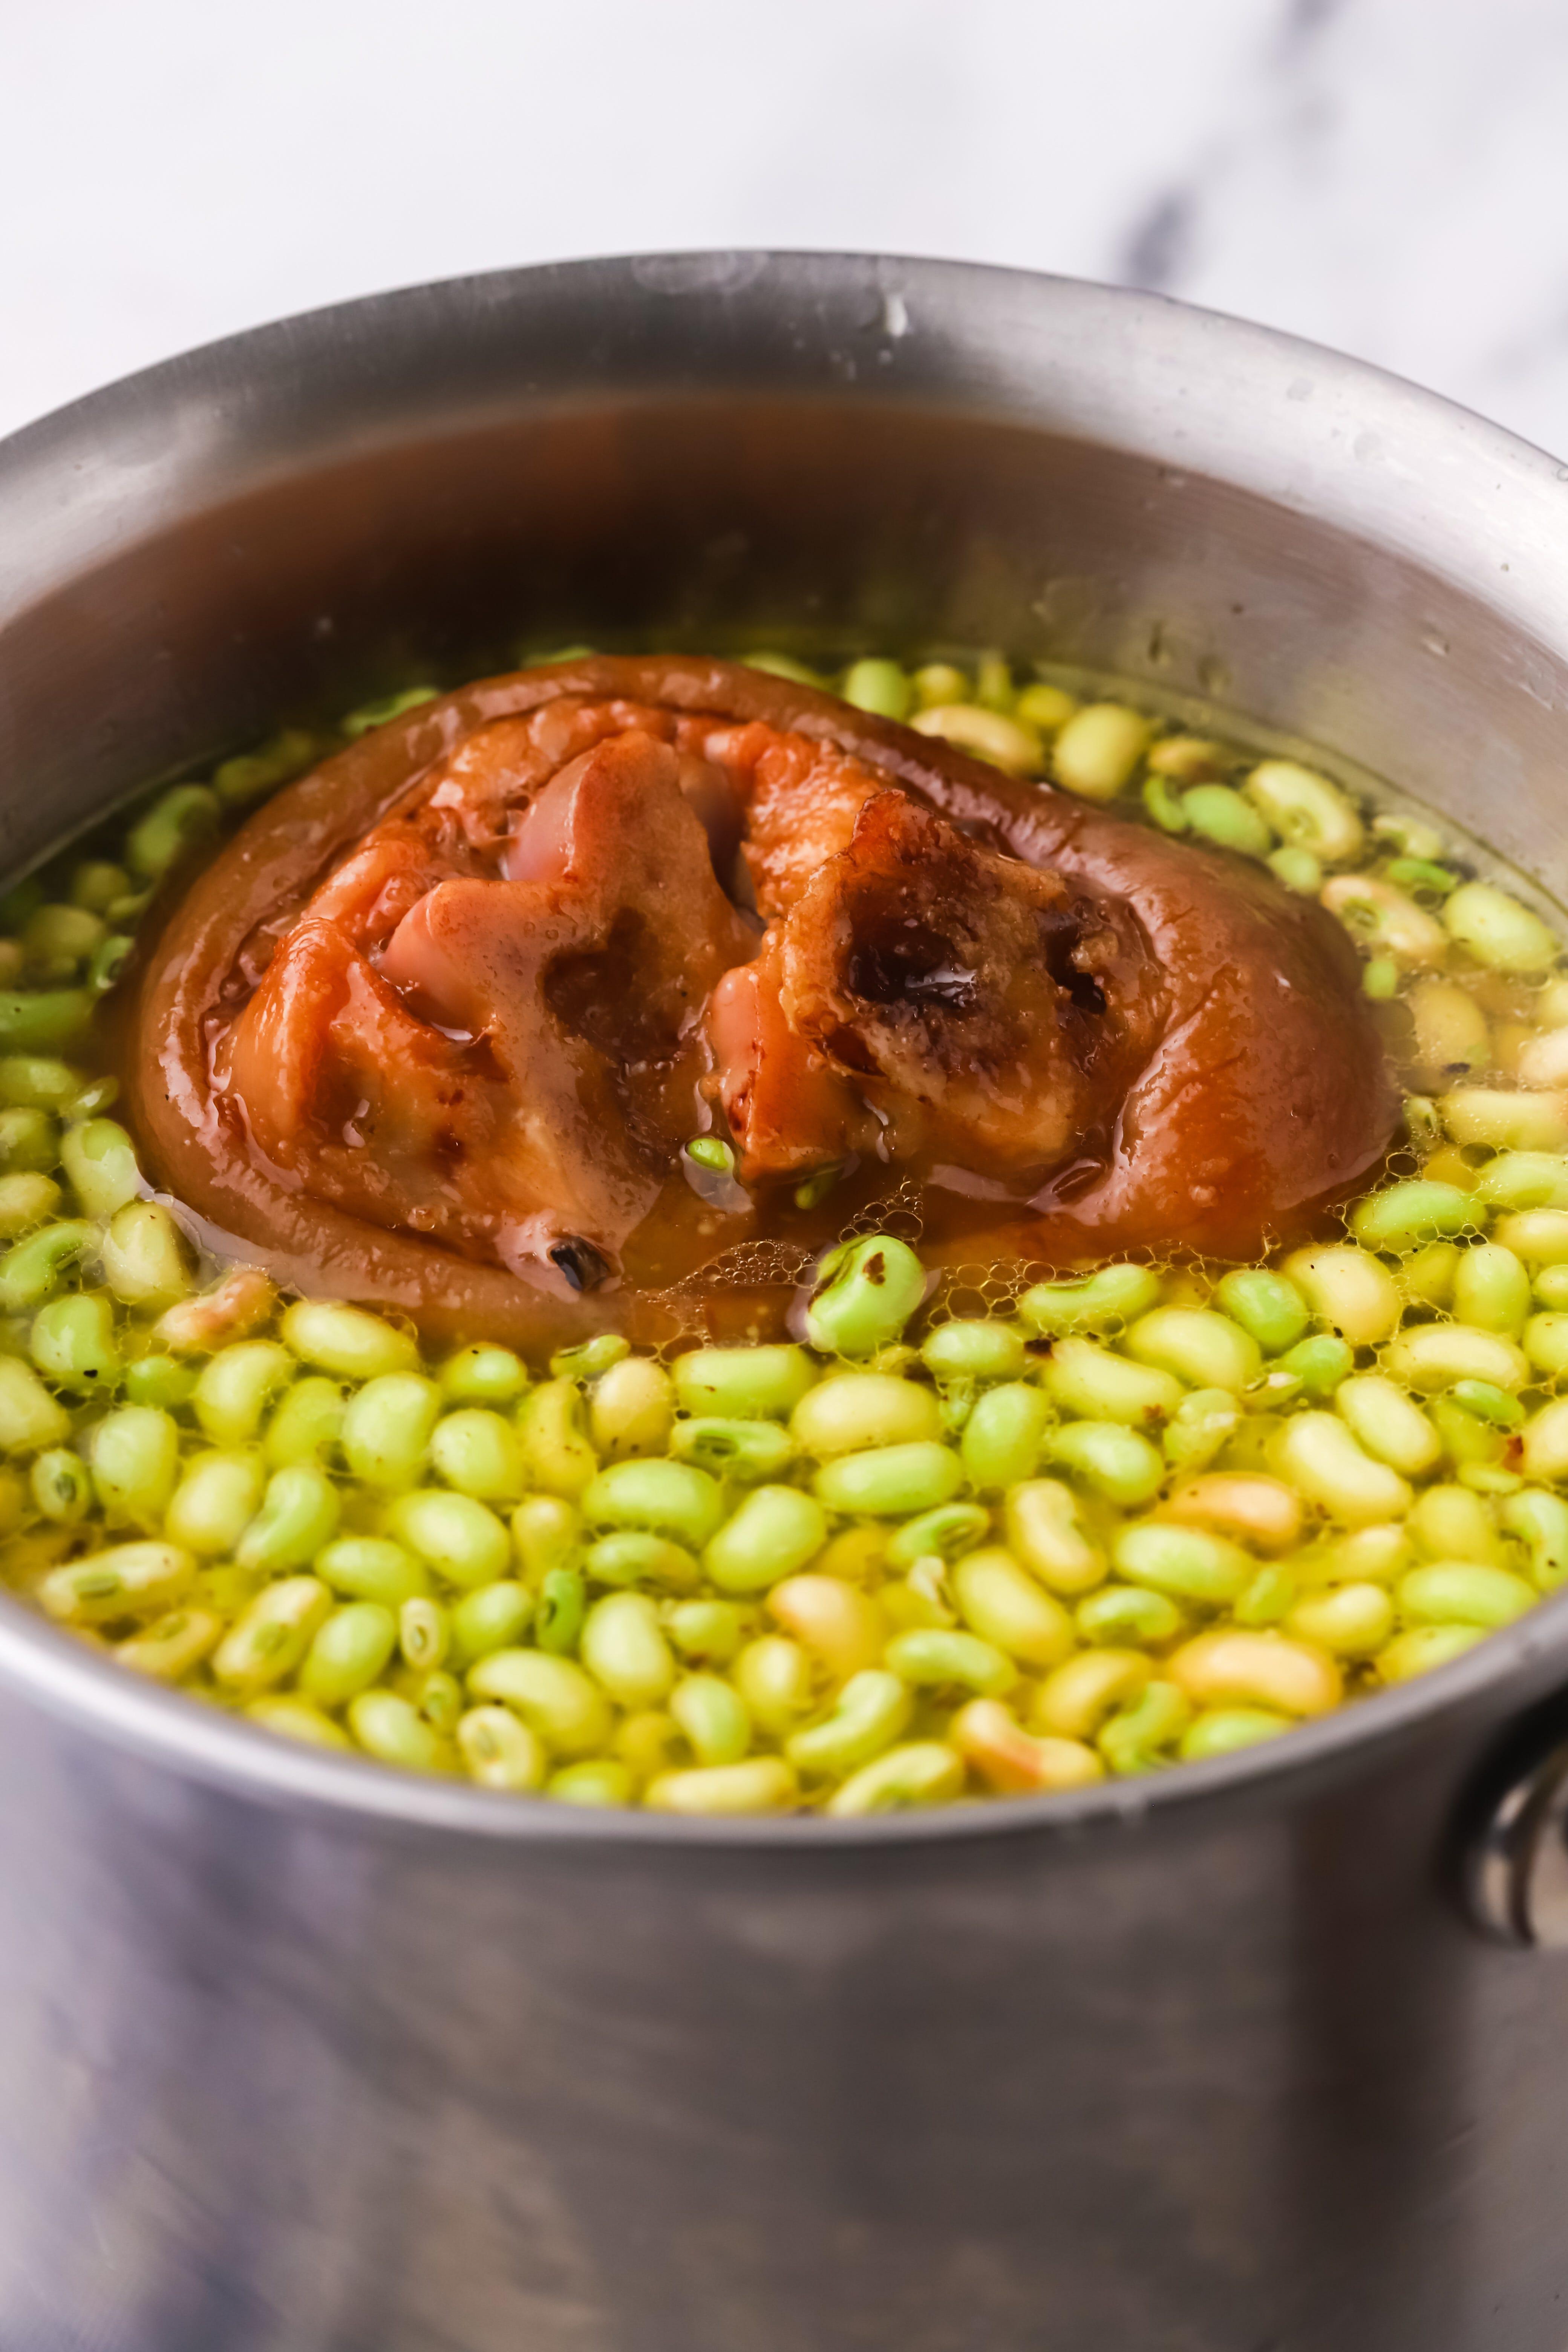 Ham hock and bacon grease are traditional for cooking white acre pea.